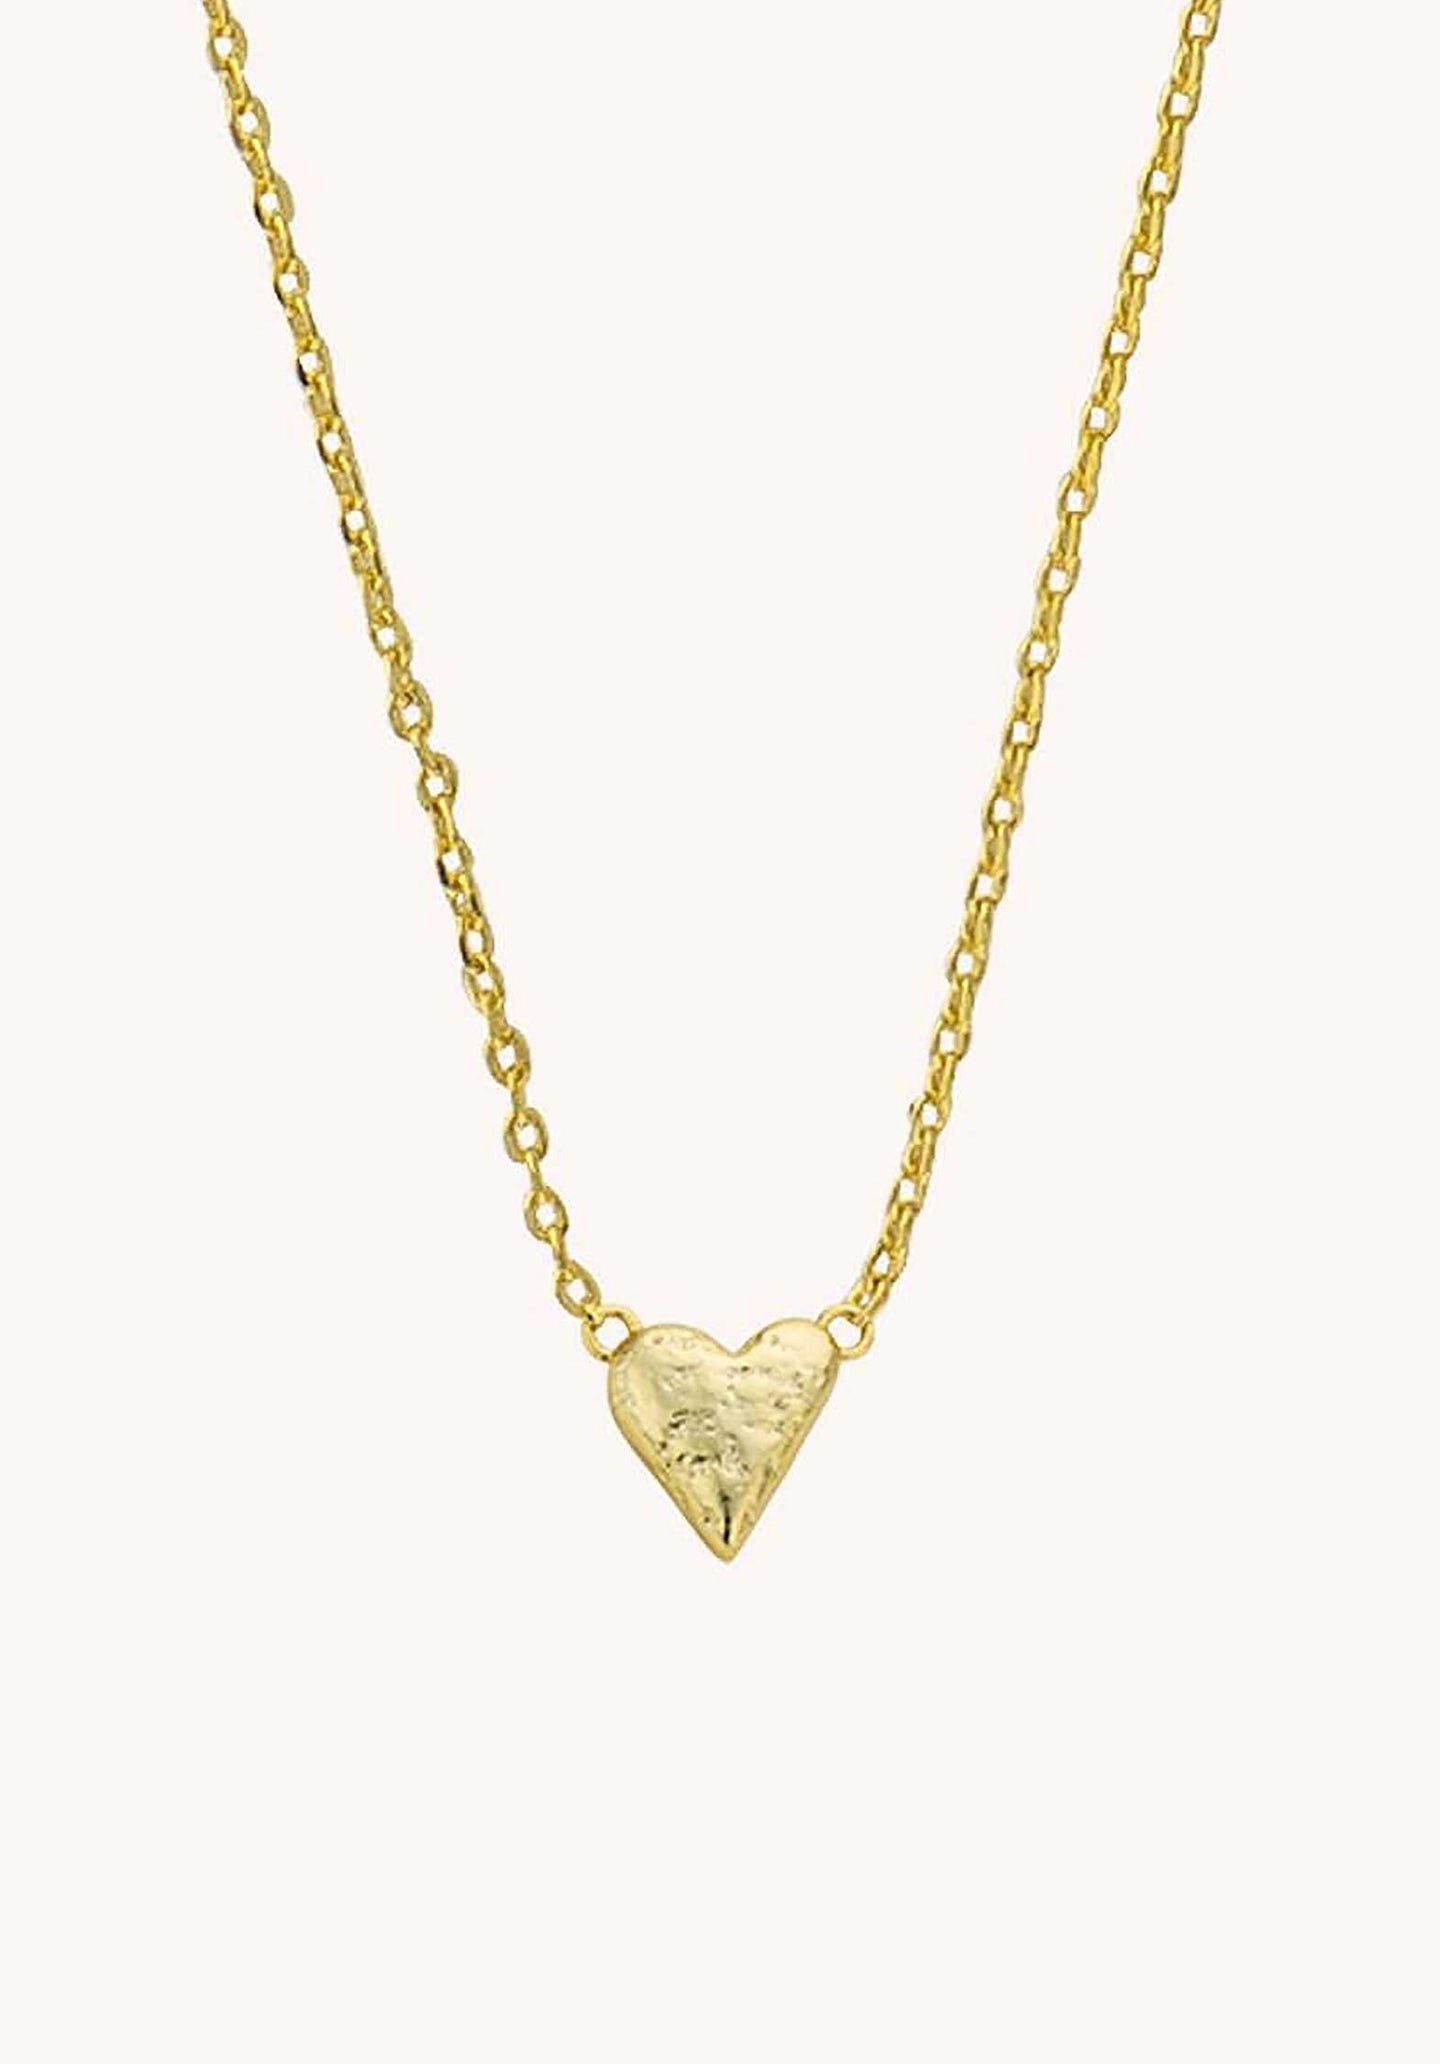 Necklace Co-217g Gold